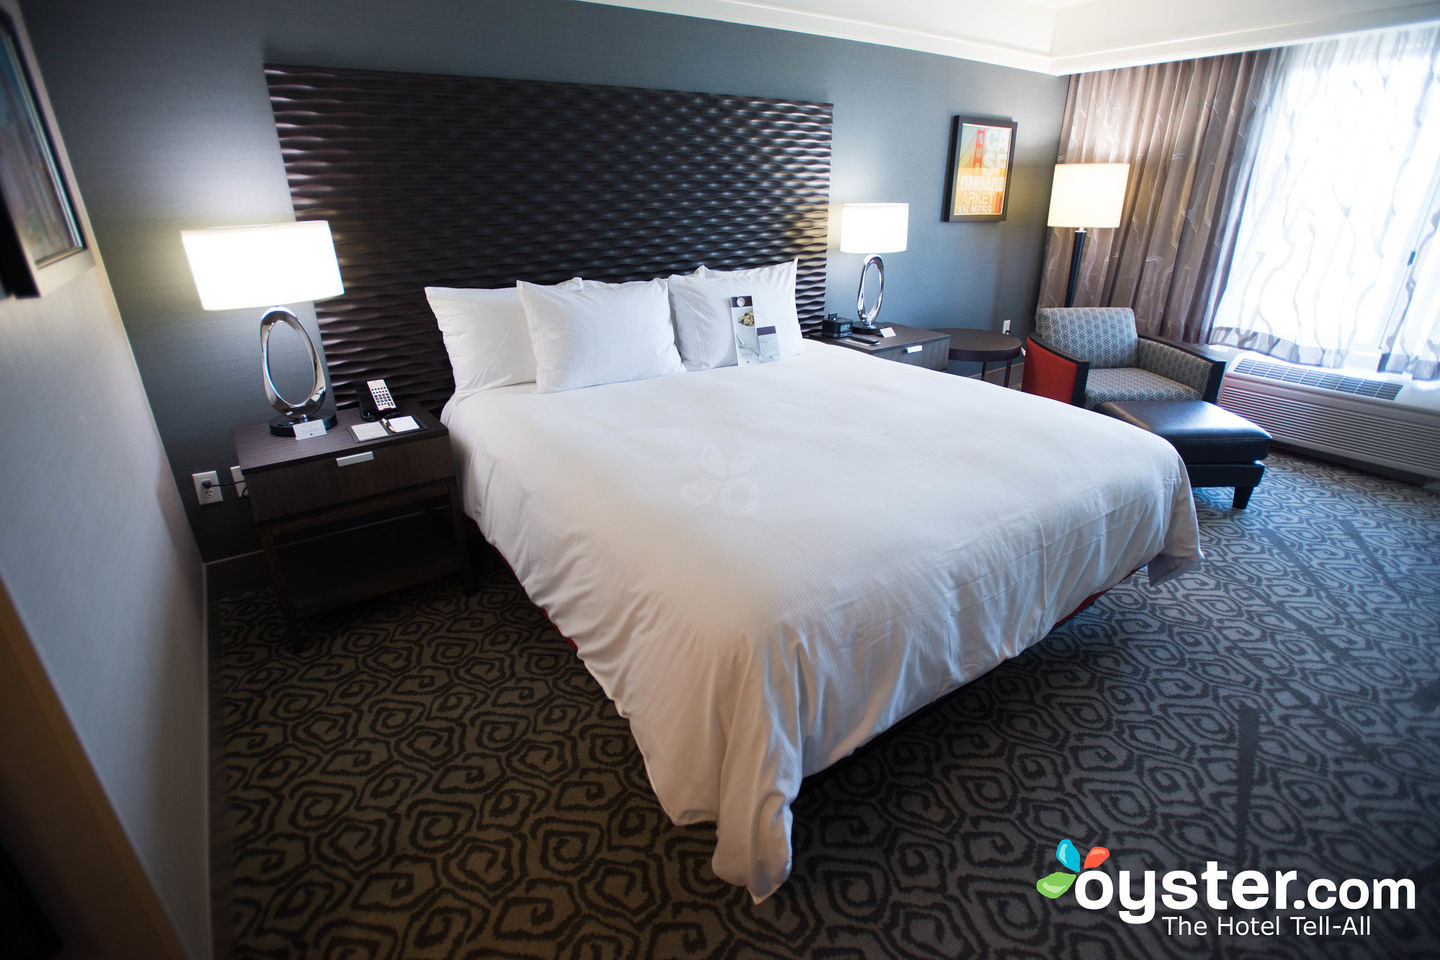 Doubletree By Hilton Hotel San Francisco Airport North Review What To Really Expect If You Stay